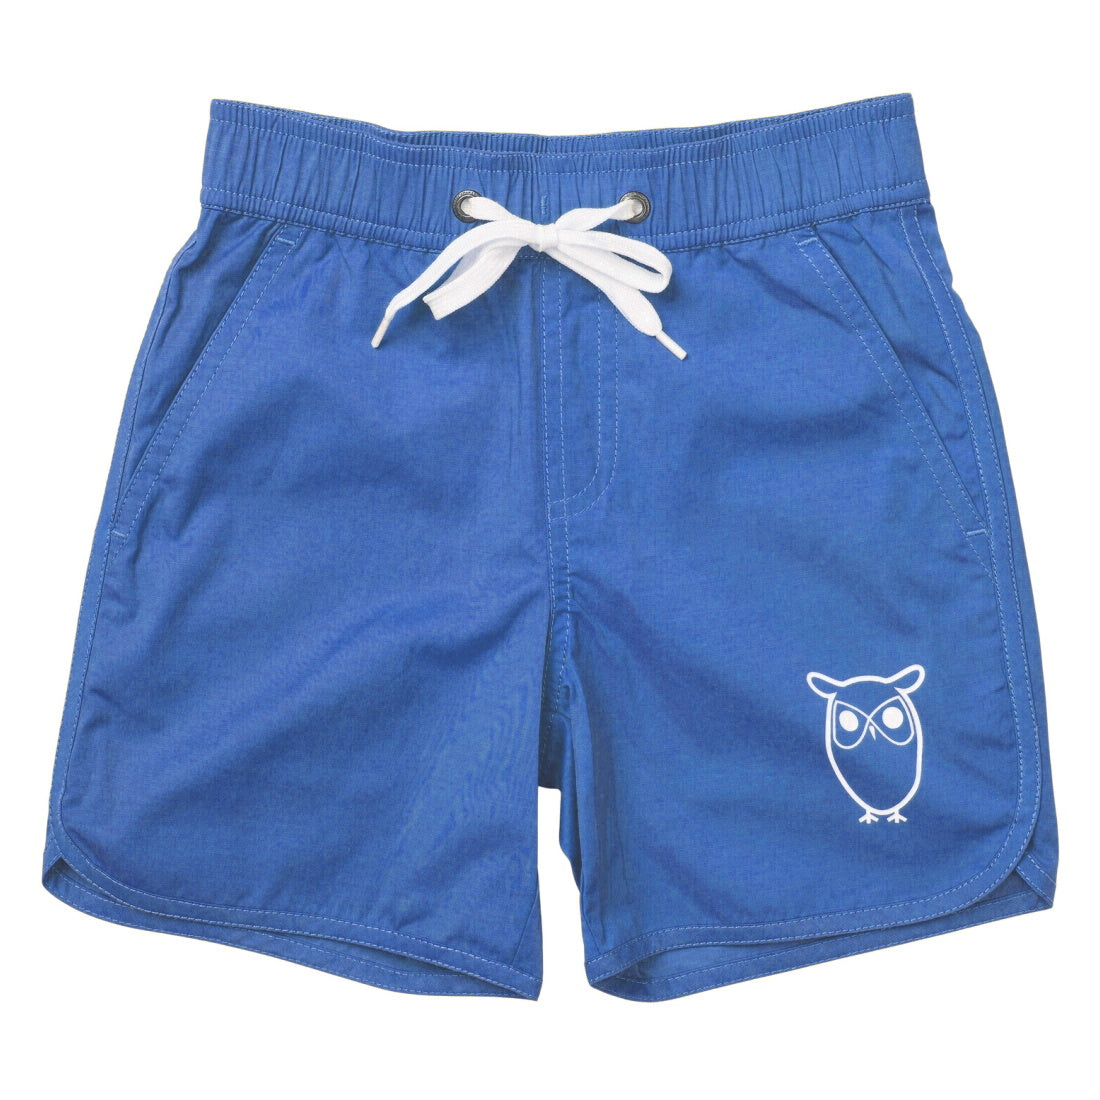 Kids Badehose OWL mit recyceltem Material